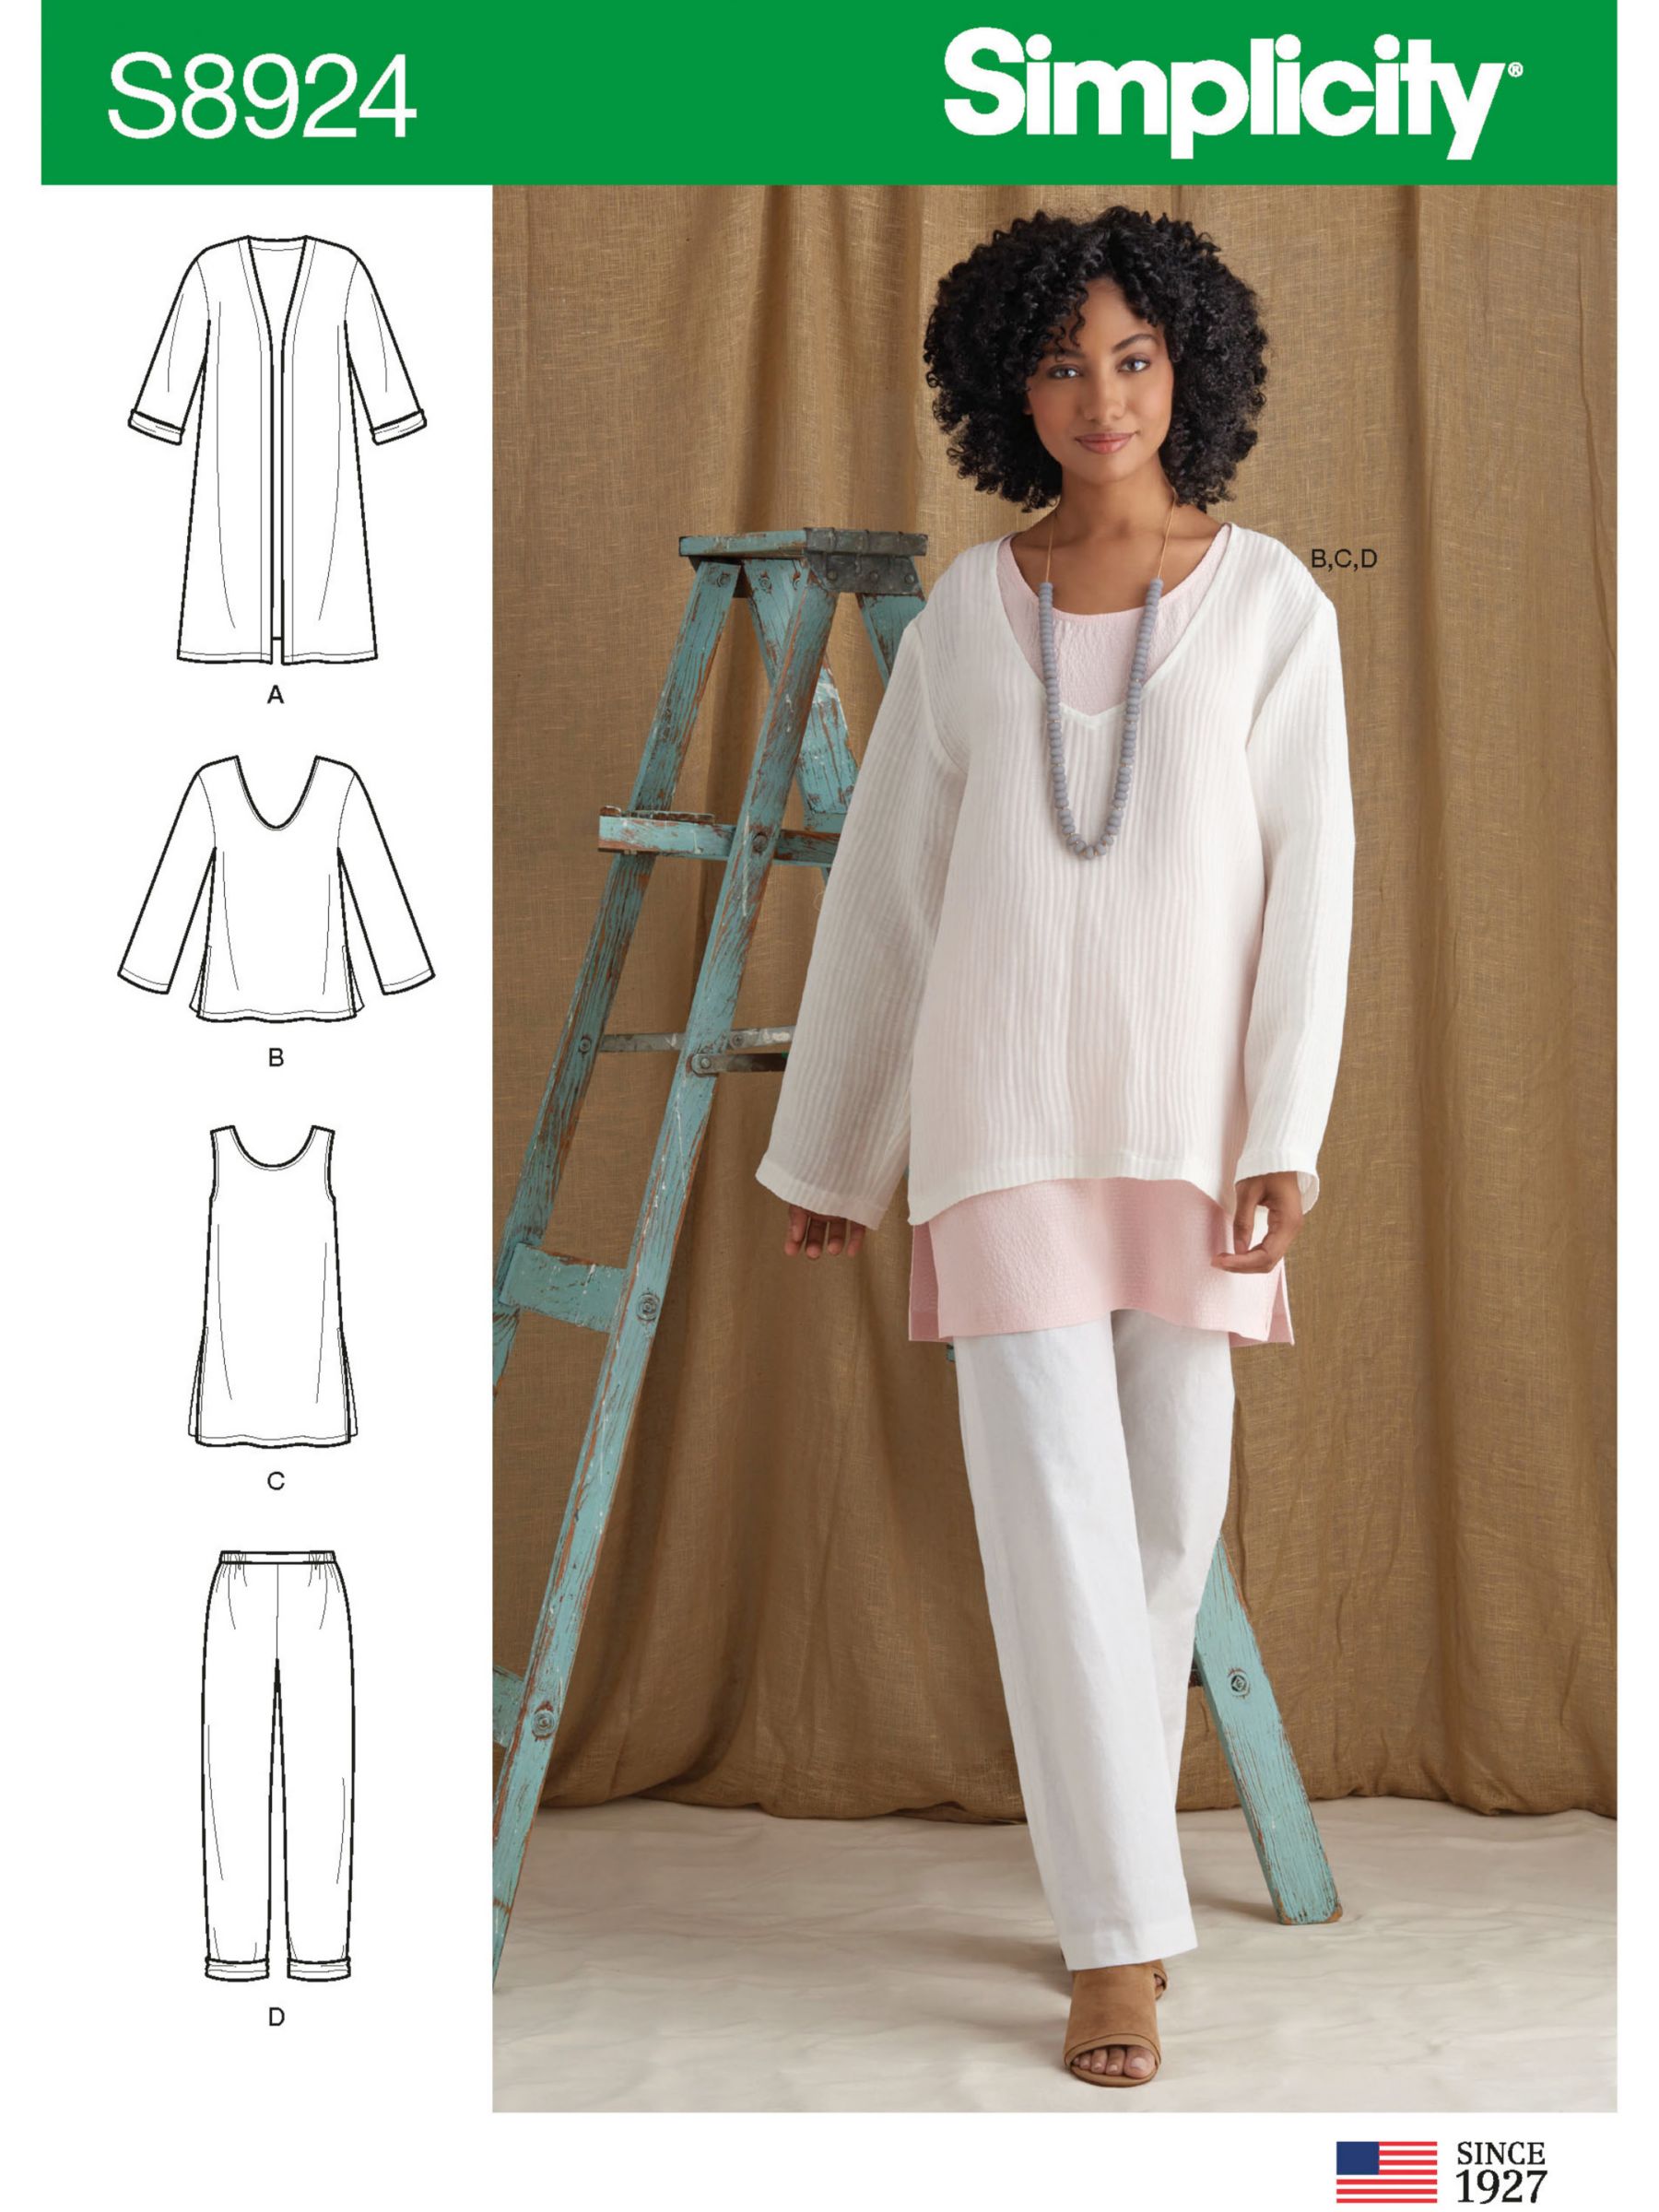 Simplicity Women's Tunic Tops and Trousers Sewing Pattern, 8924